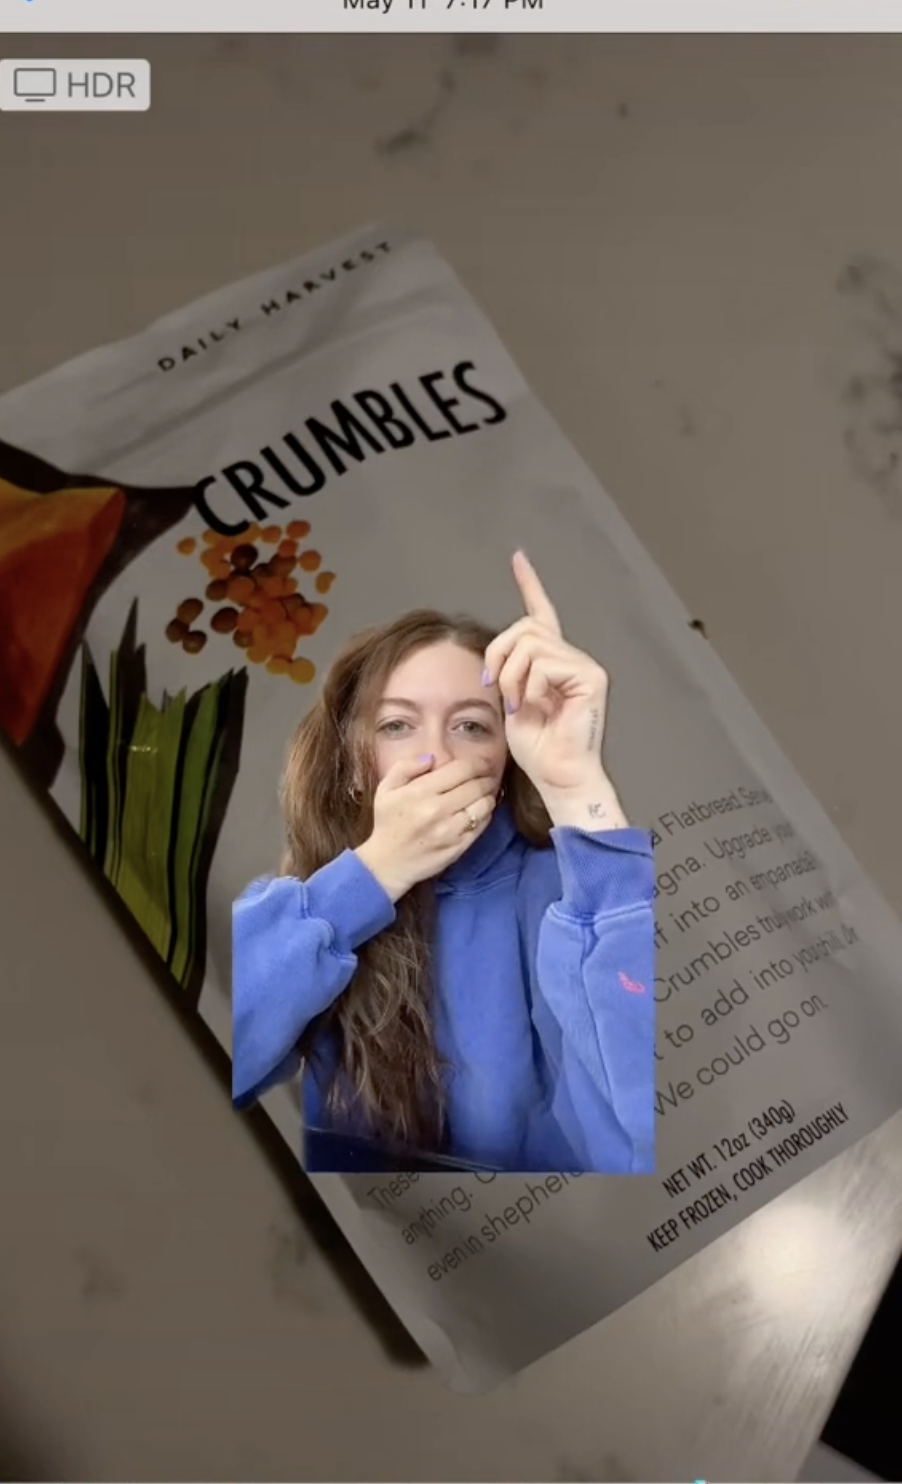 Jenna pointing to the crumbles in her tiktok